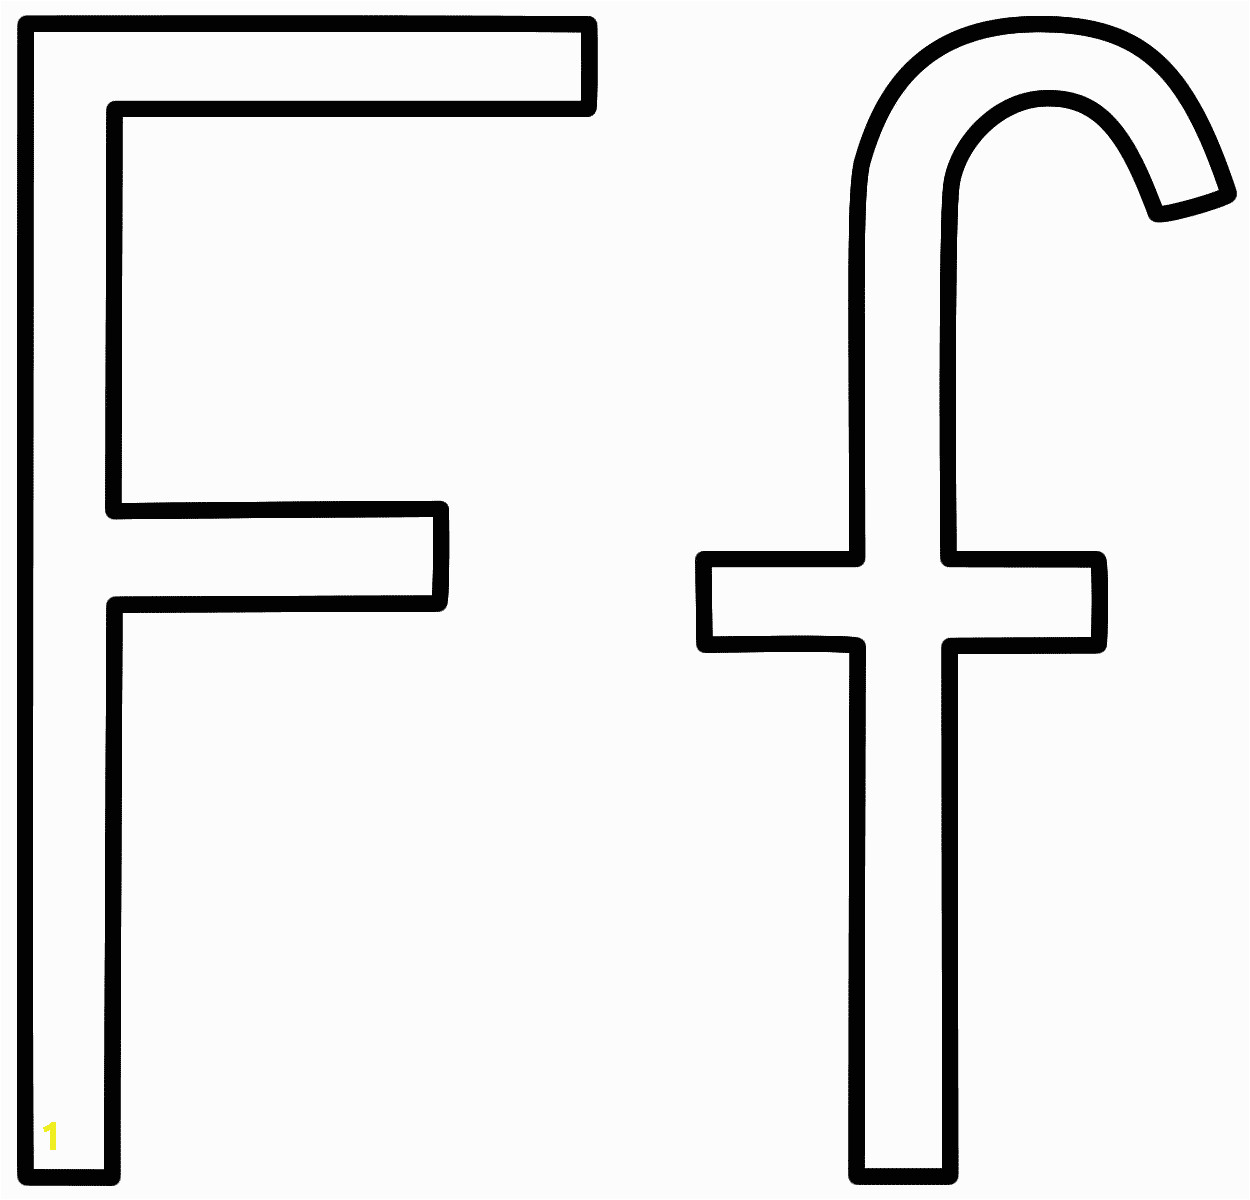 Coloring Pages Of the Letter F Letter F Printable Coloring Pages for Preschool